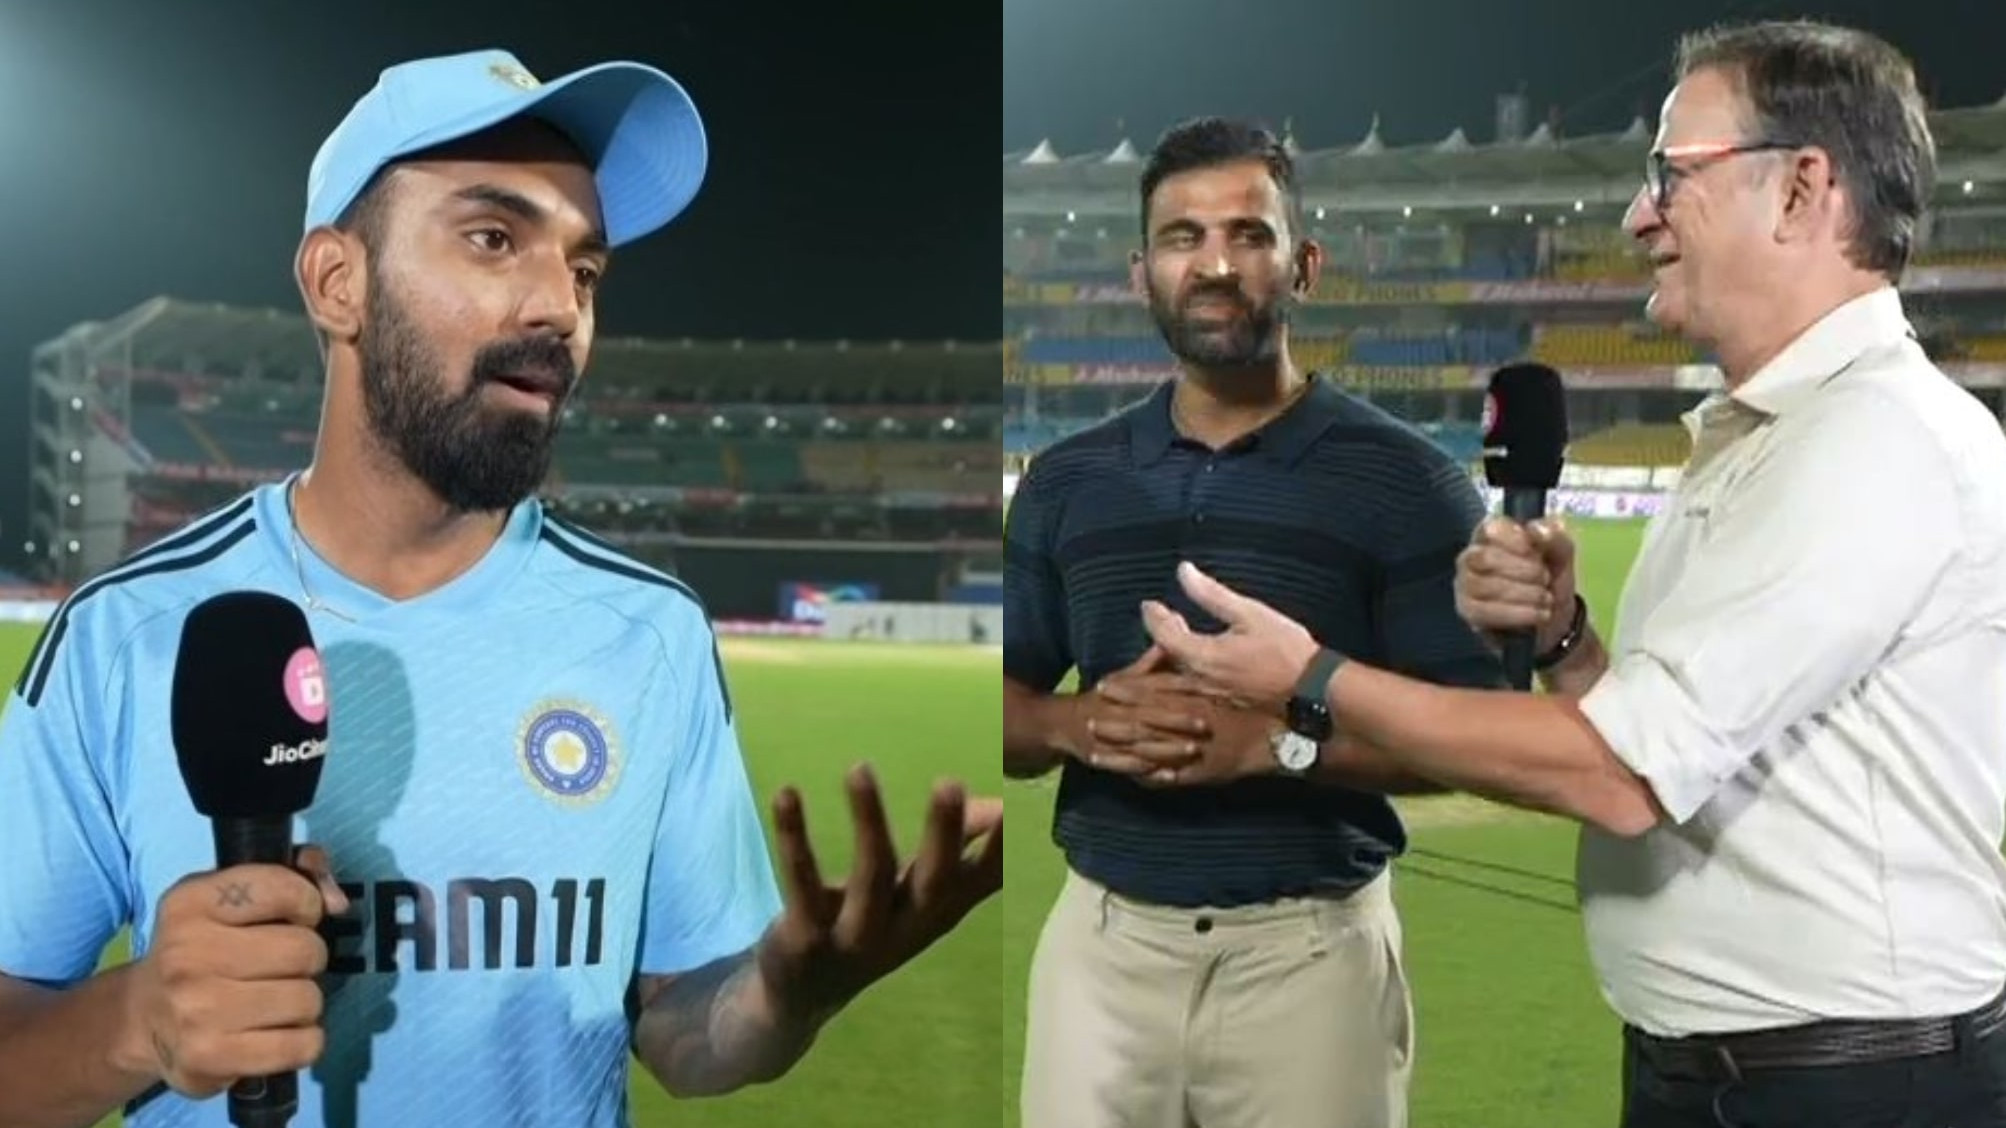 IND v AUS 2023: 'Everybody said skip, you've made the worst decision by opting to bowl' - KL Rahul on Mohali ODI